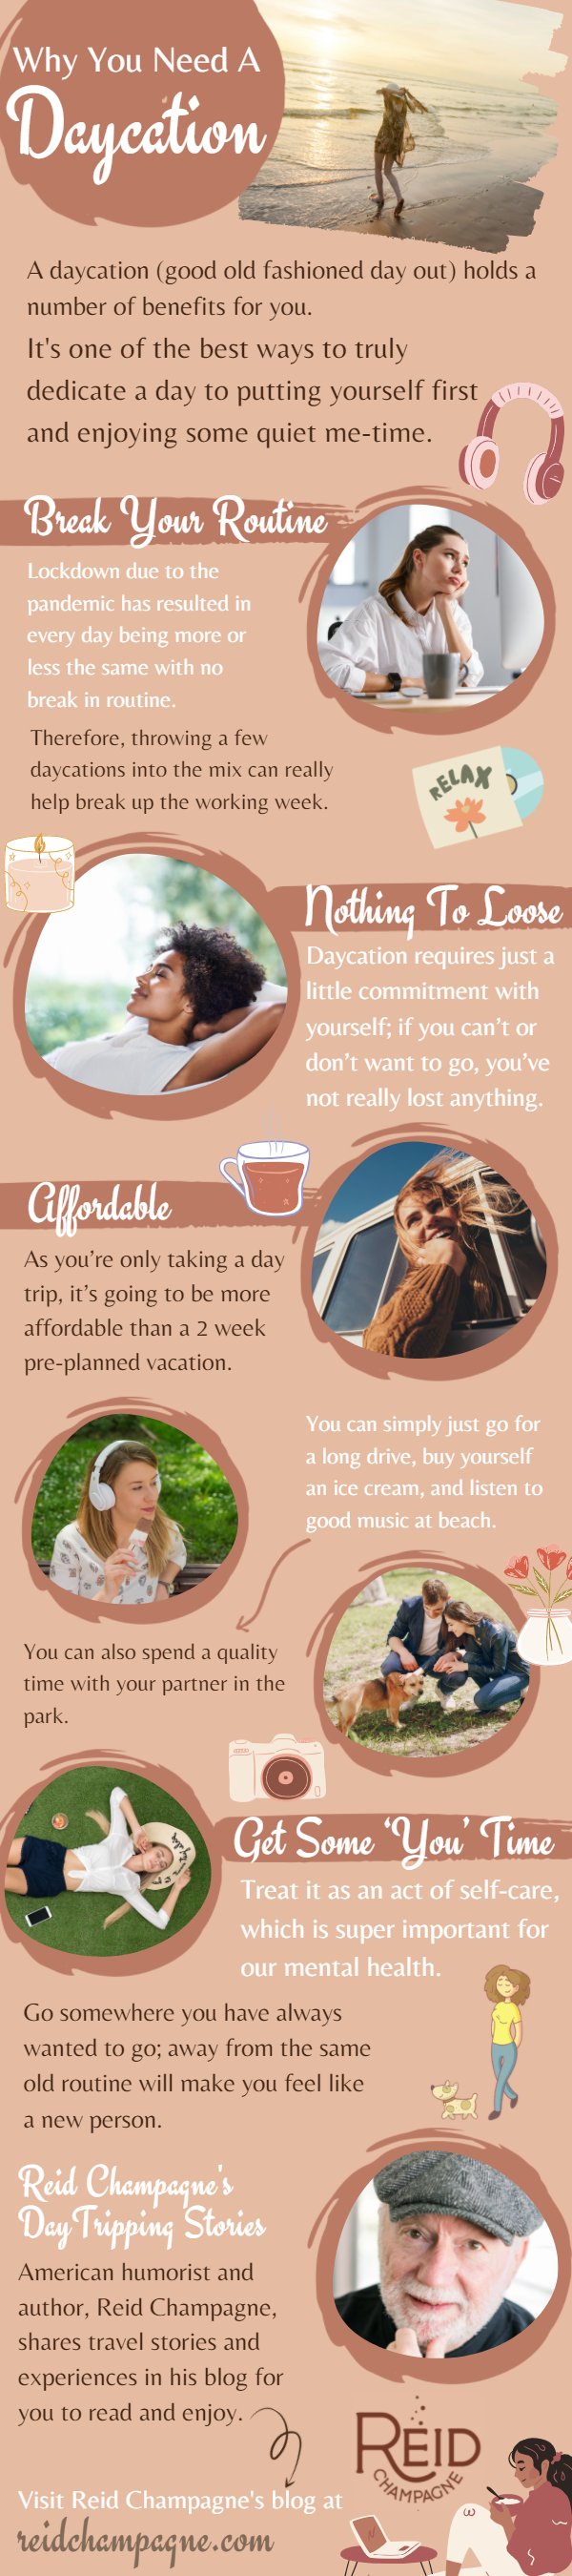 why you need a daycation